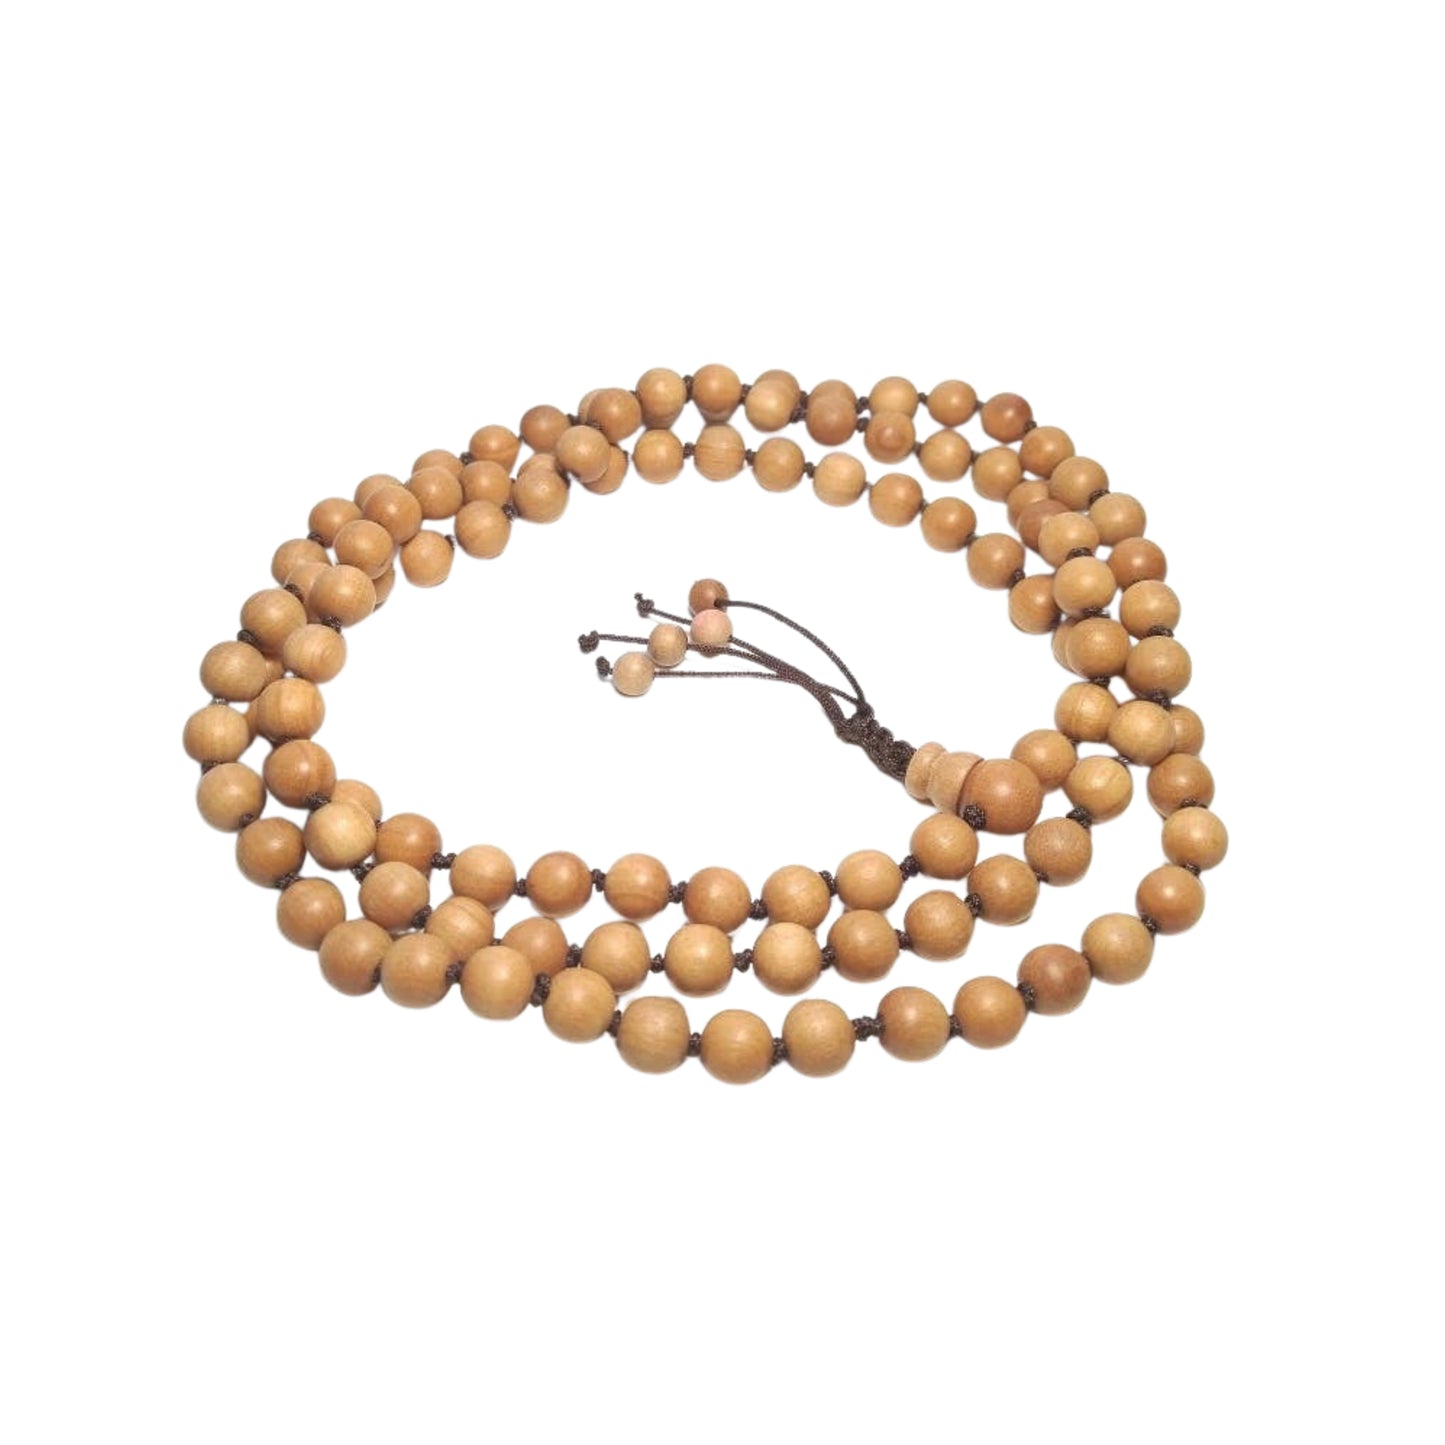 Sustainable Indian Sandalwood Knotted 108 Bead Mala - 8mm (1 Pack)